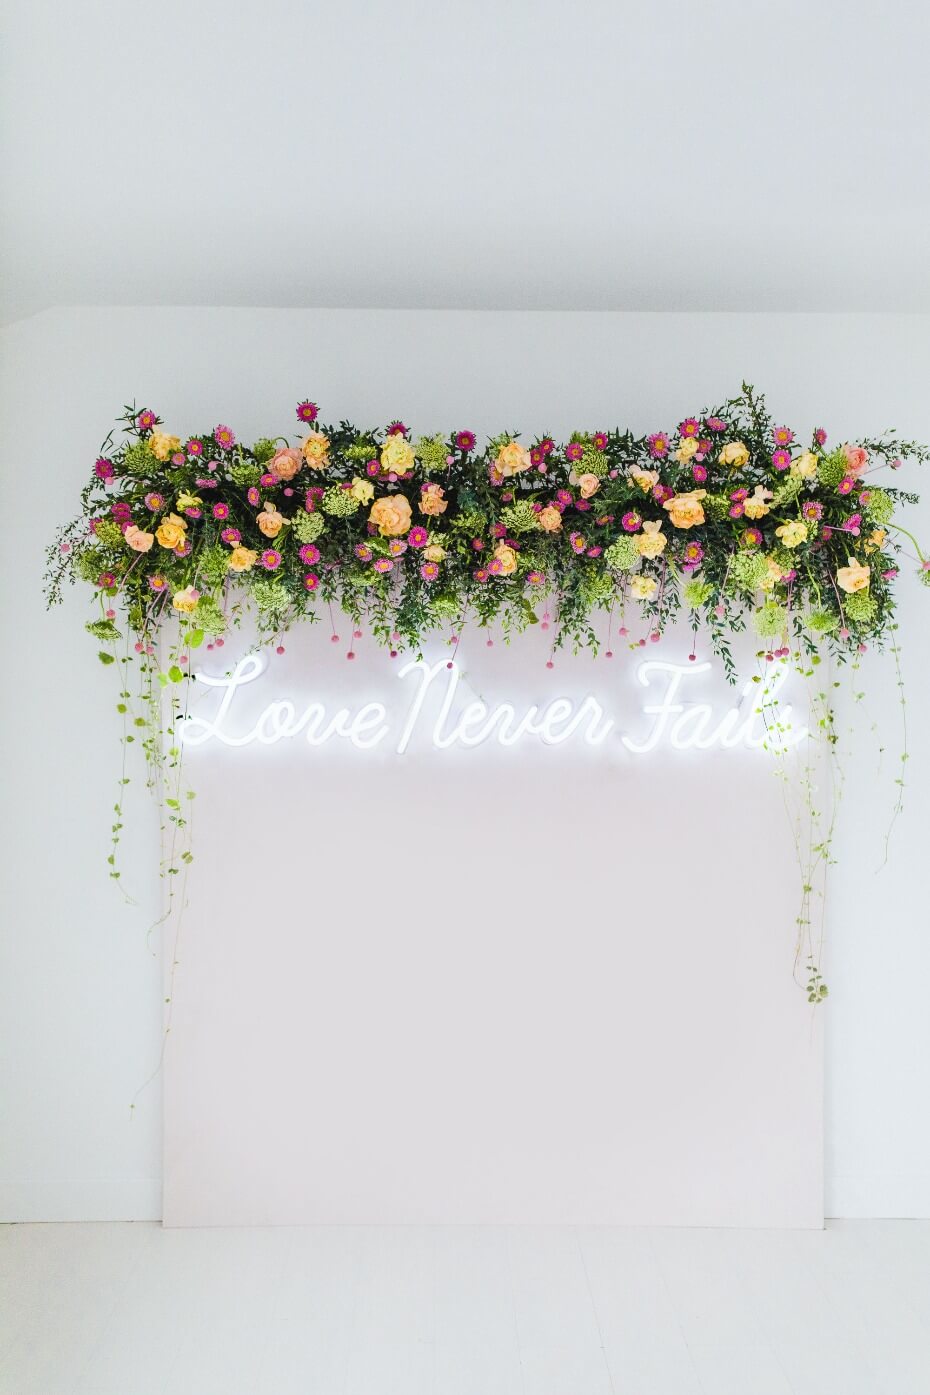 Flower Wall Floral Backdrop with Neon Sign